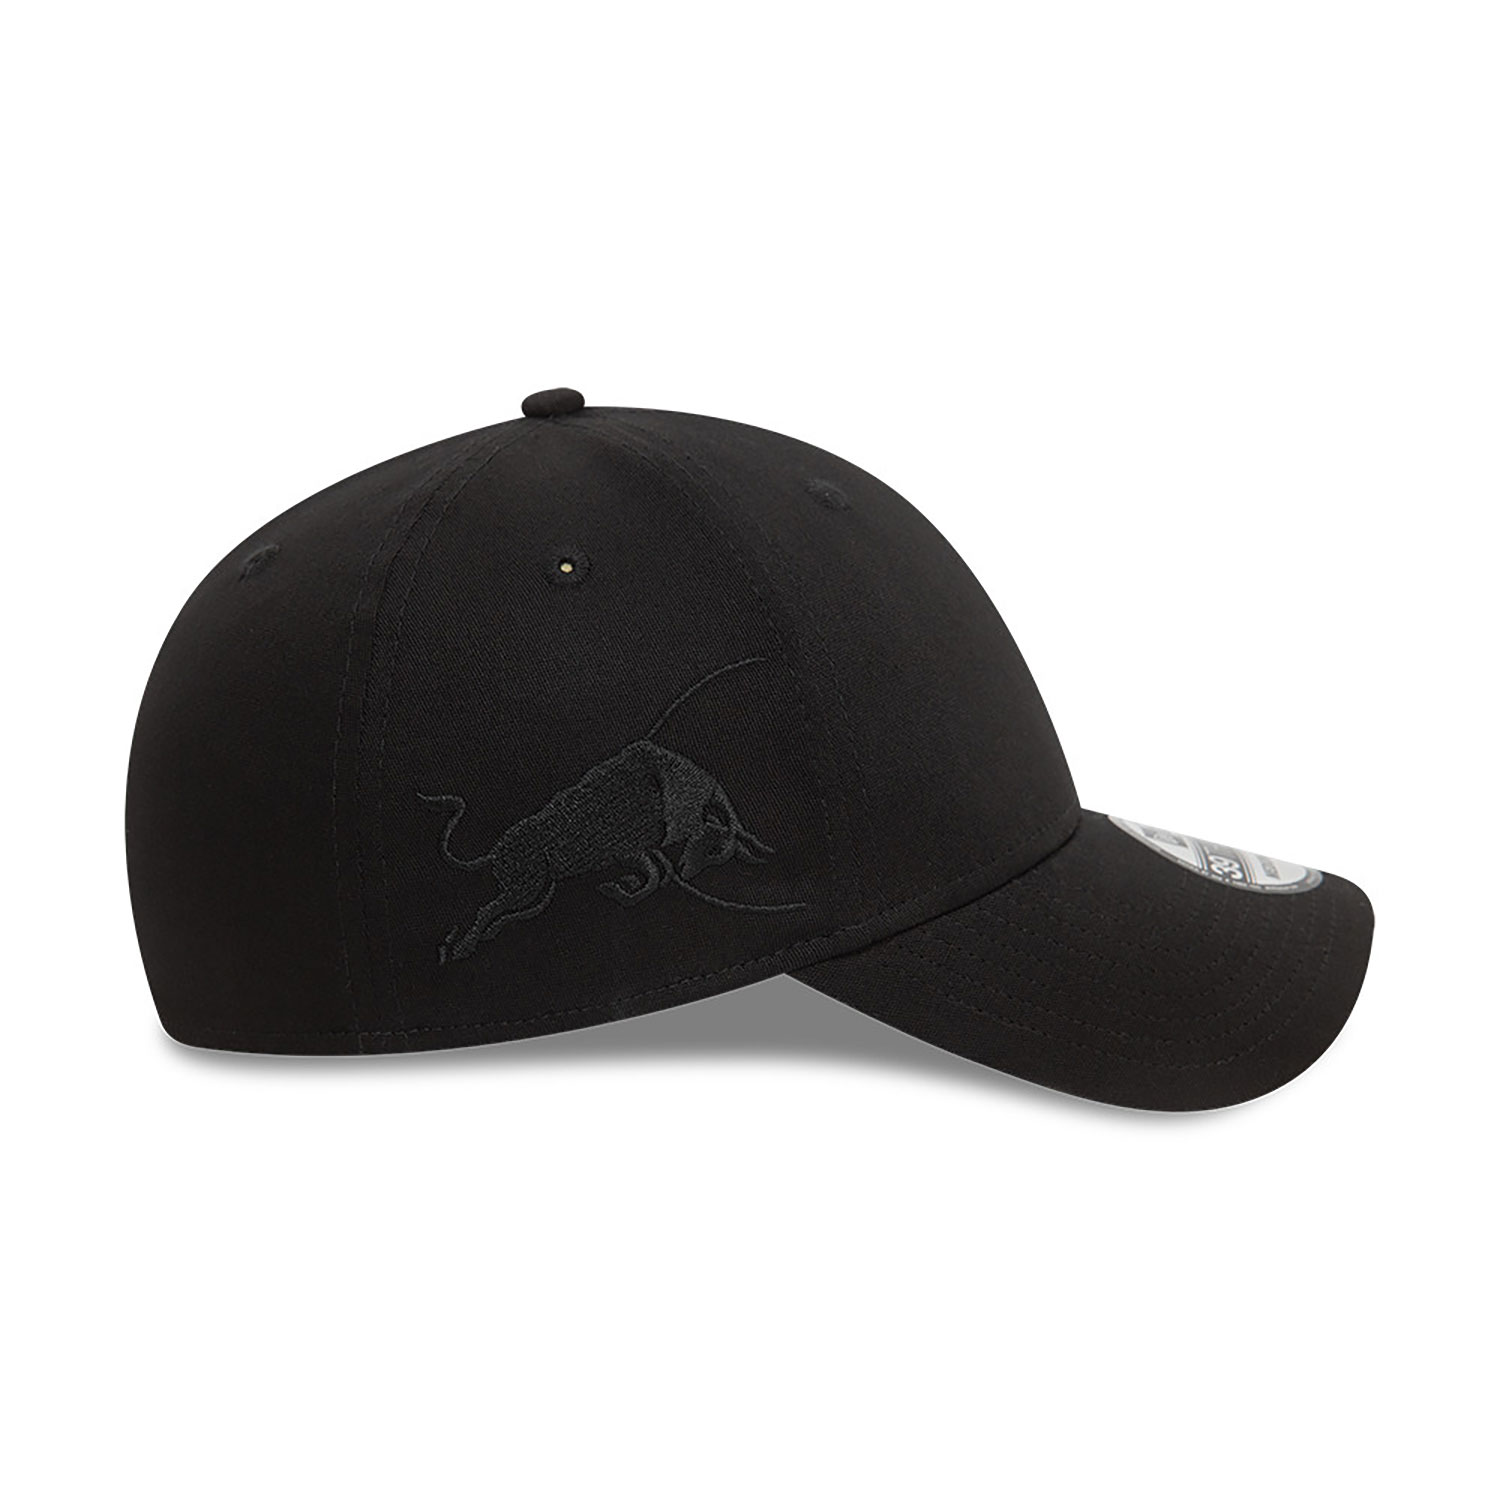 Red Bull Racing Flawless Black 39THIRTY Stretch Fit Cap